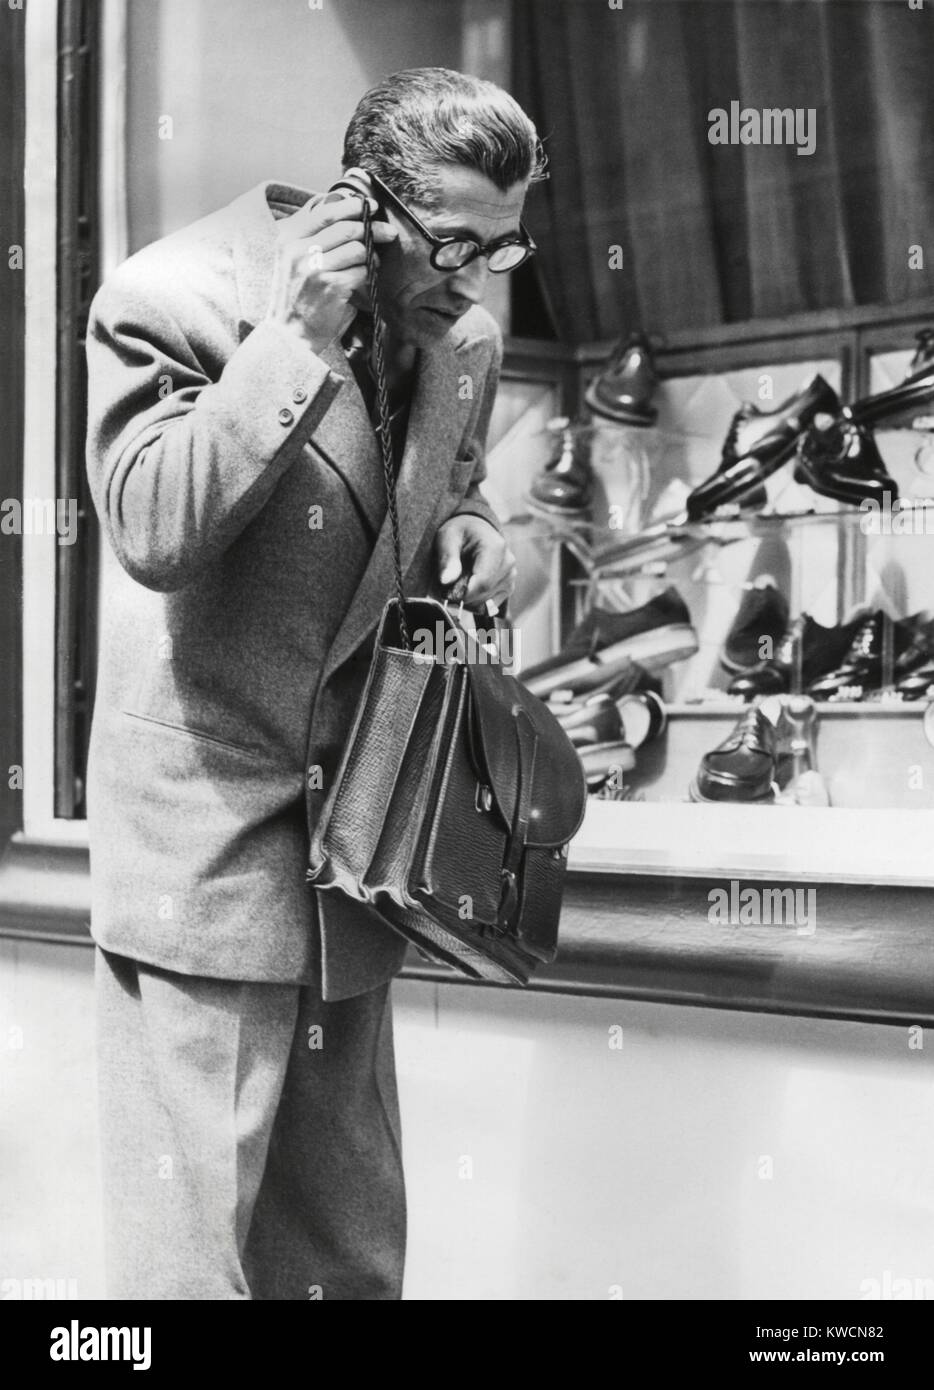 The 'Telephonogramme' in use of the streets of Paris, May 10, 1950. This was an early wireless mobile telephone that could fit into a briefcase. - (BSLOC_2014_17_110) Stock Photo